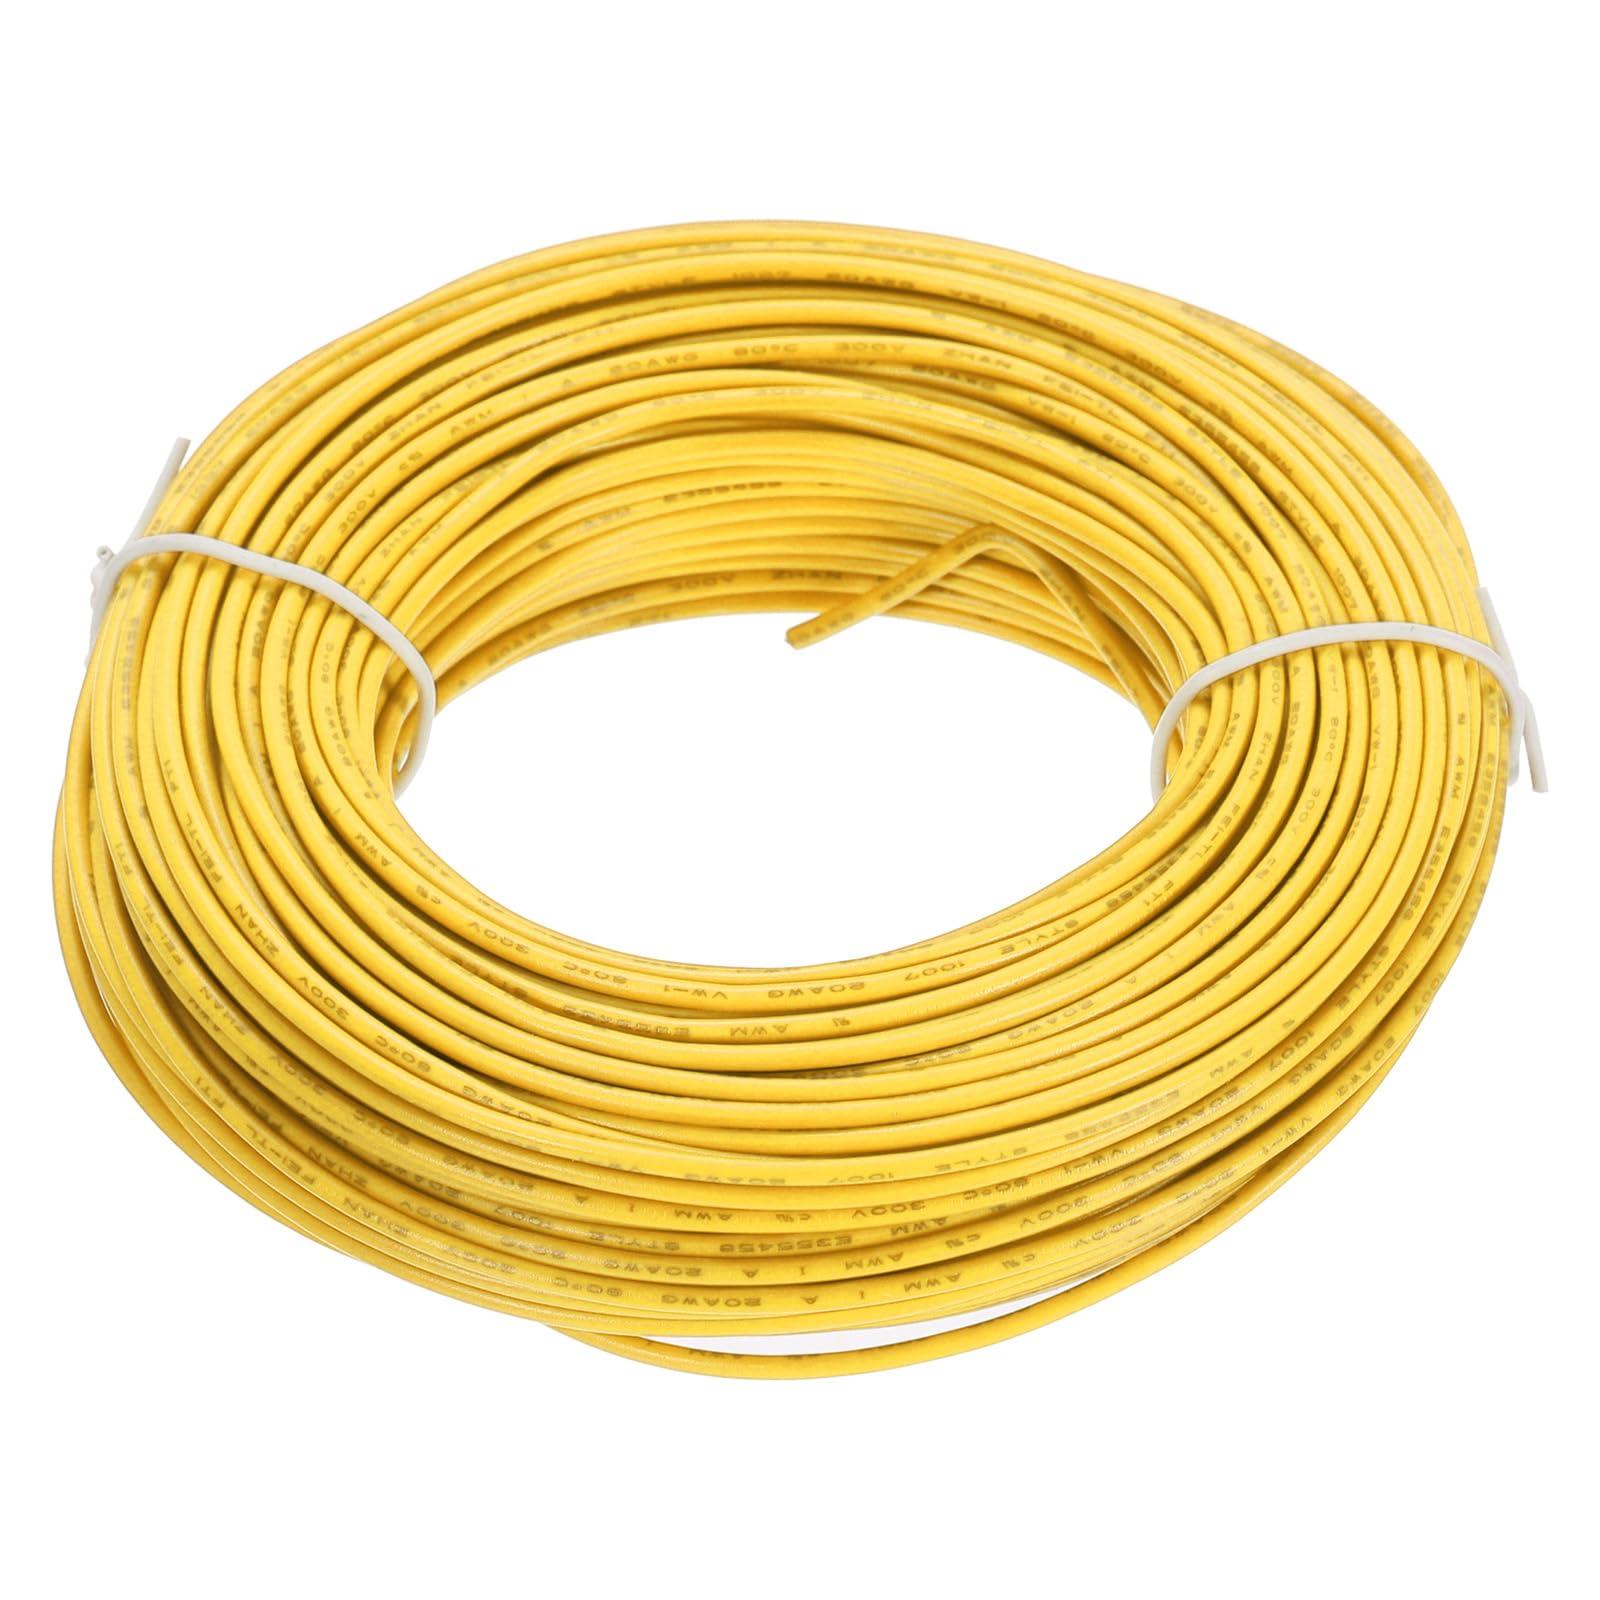 sourcing map 20AWG Wire 20 Gauge Stranded Wire PVC Hookup Wire, Electrical Wire UL1007 Tinned Copper Wire 30m/100ft Yellow for Internal Connecting Wire